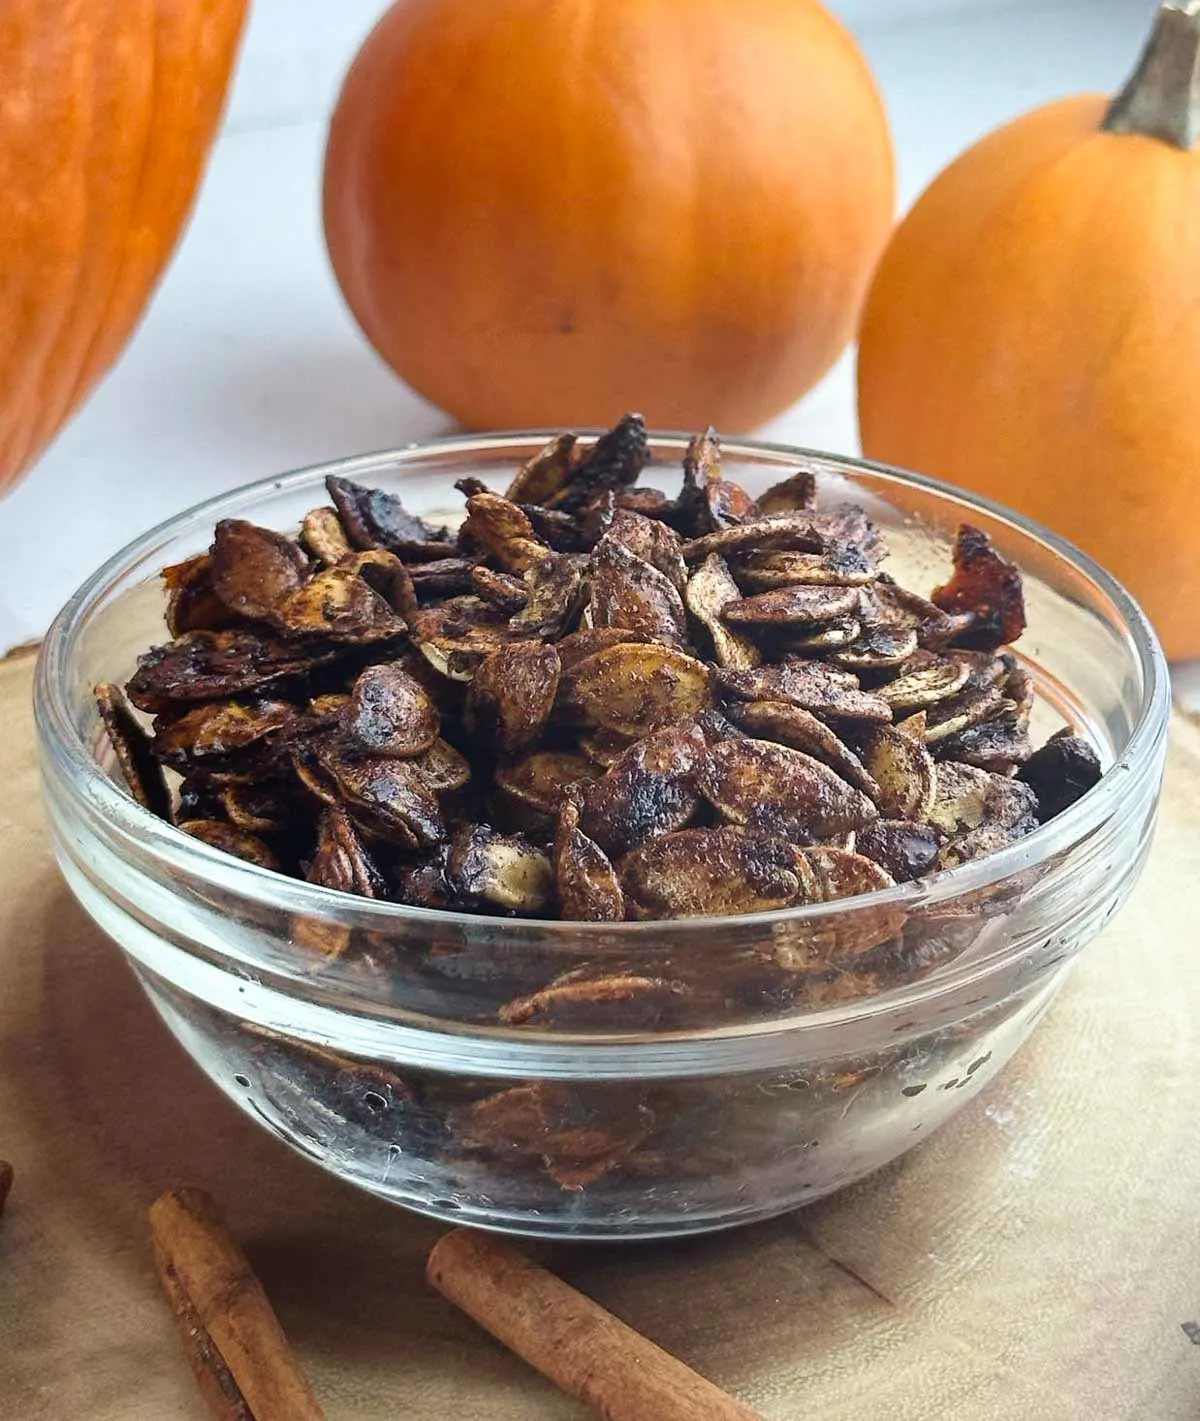 Honey roasted pumpkin seeds are an easy way to make use of the seeds from your Halloween pumpkin. Pumpkin seeds get tossed with olive oil, sweet honey, cinnmon, and sea salt for a yummy snack or topping!